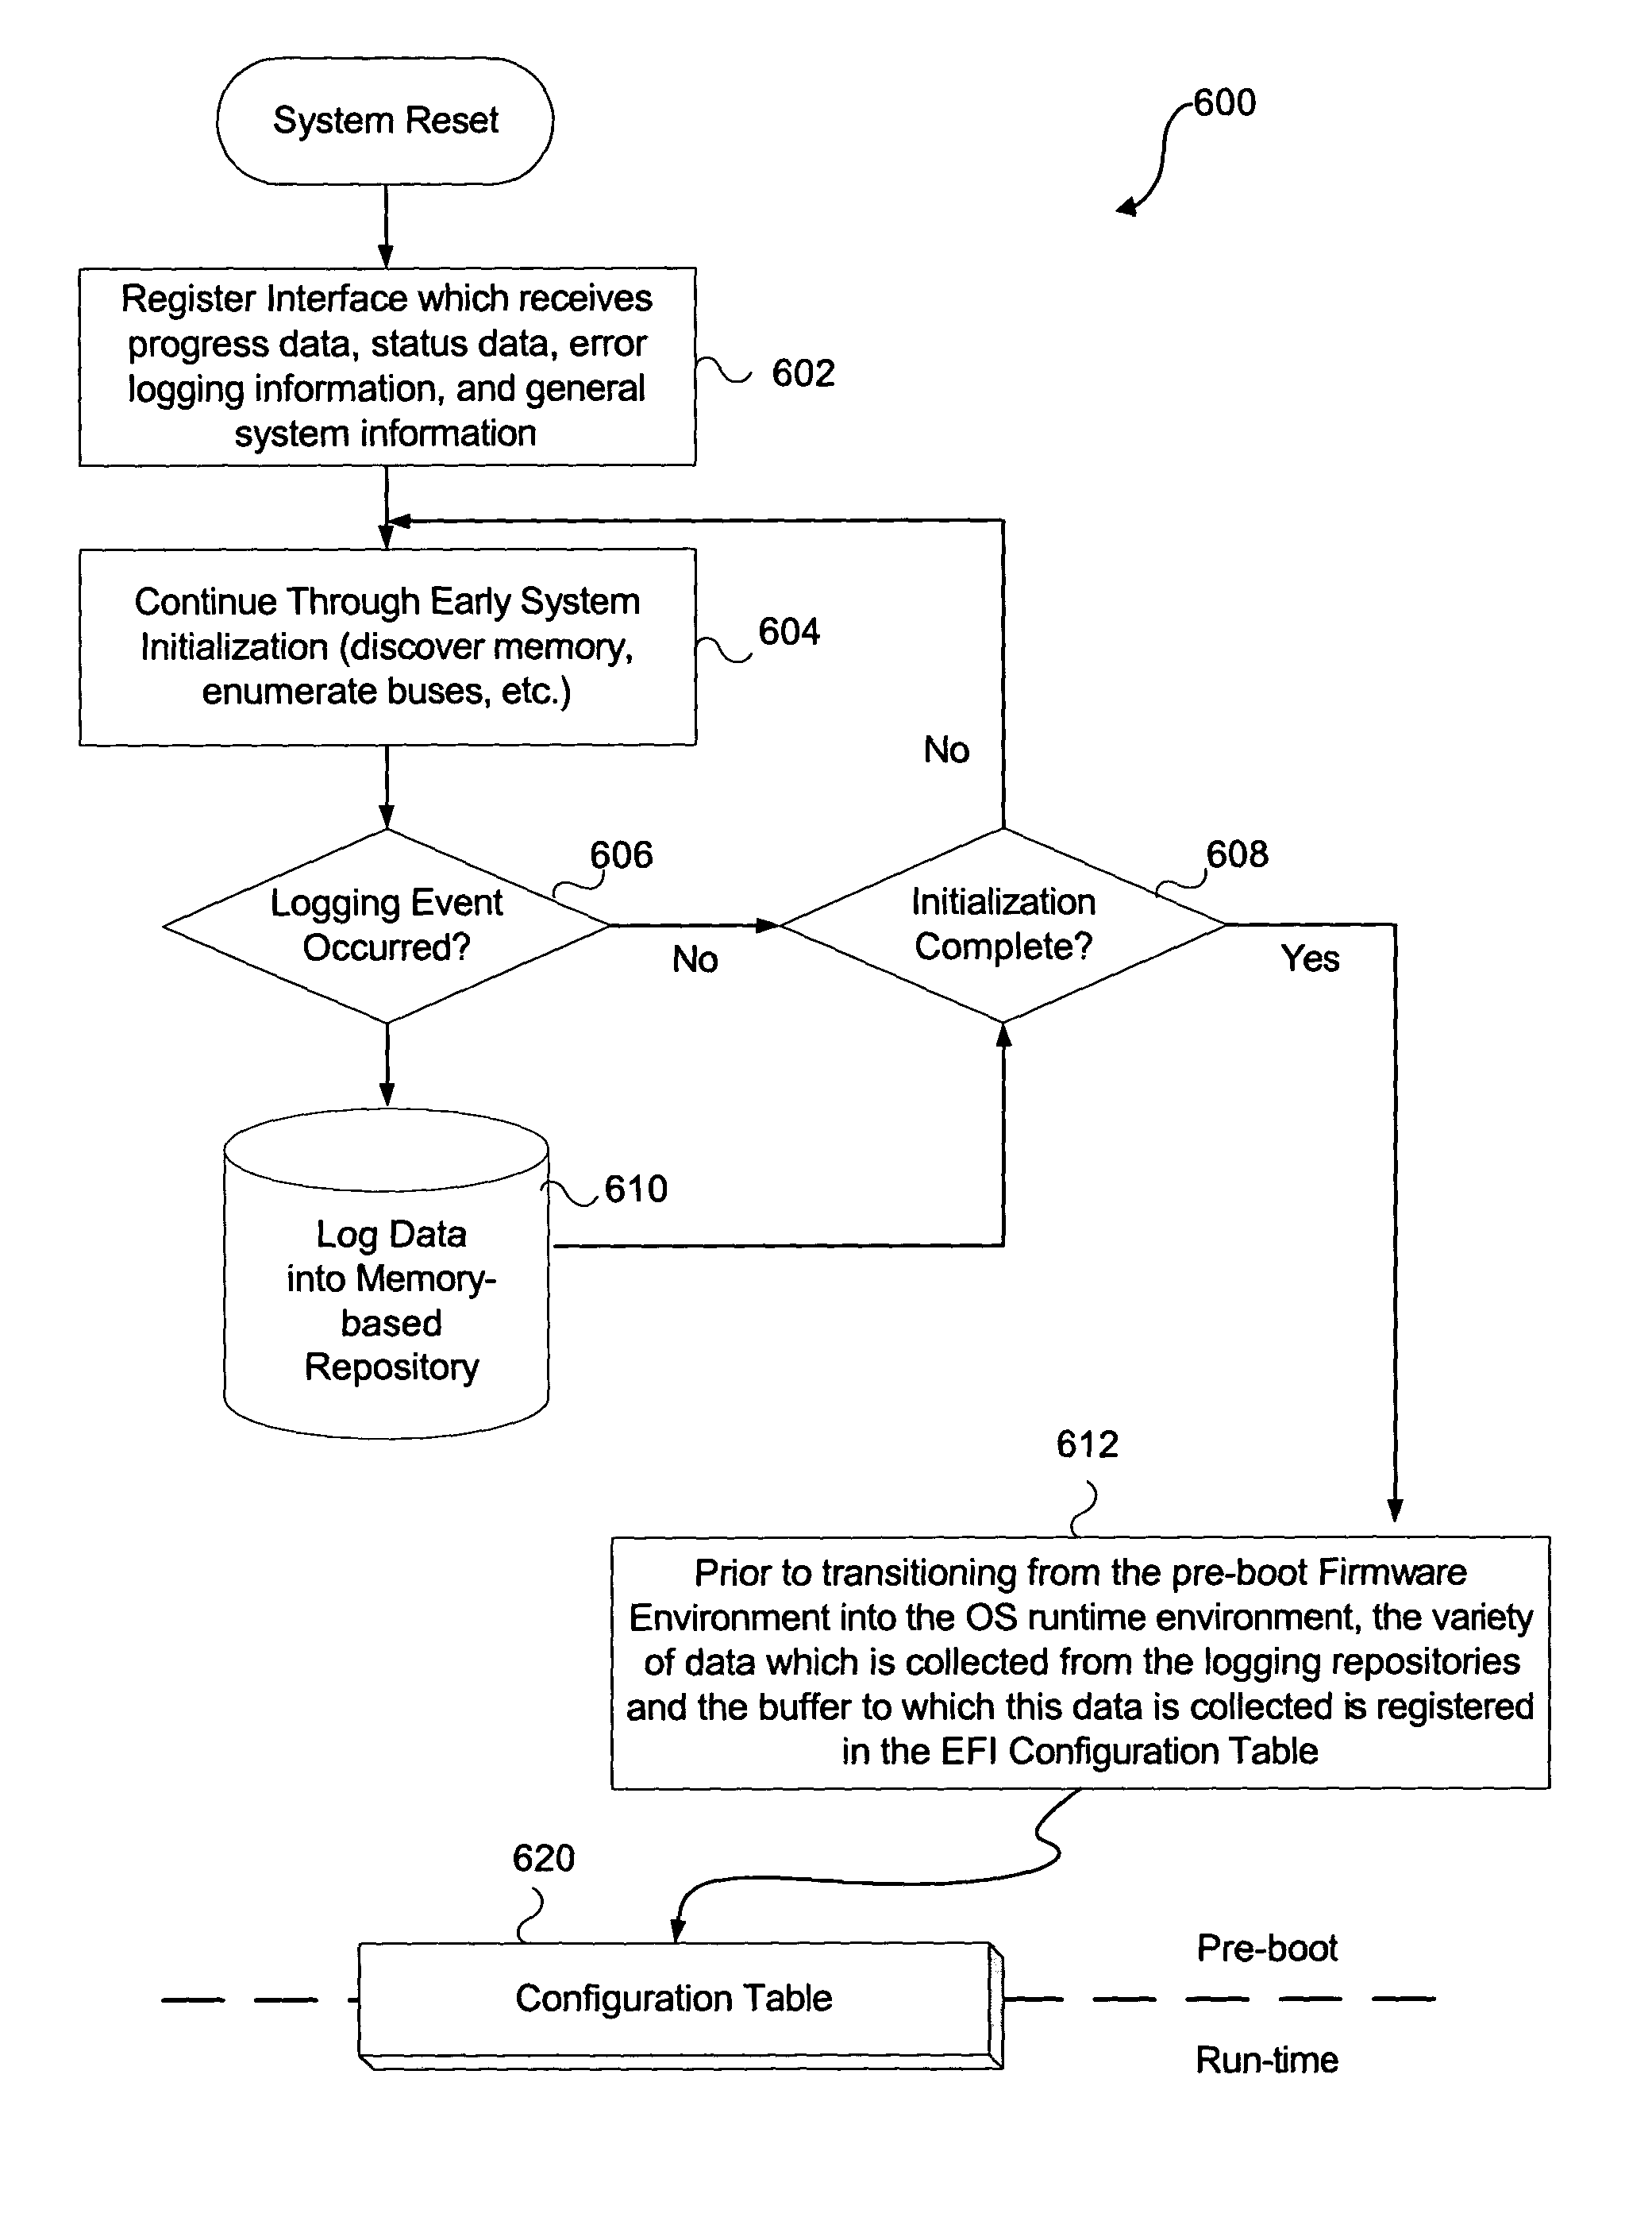 System and method for firmware to export pre-boot data into the operating system runtime environment